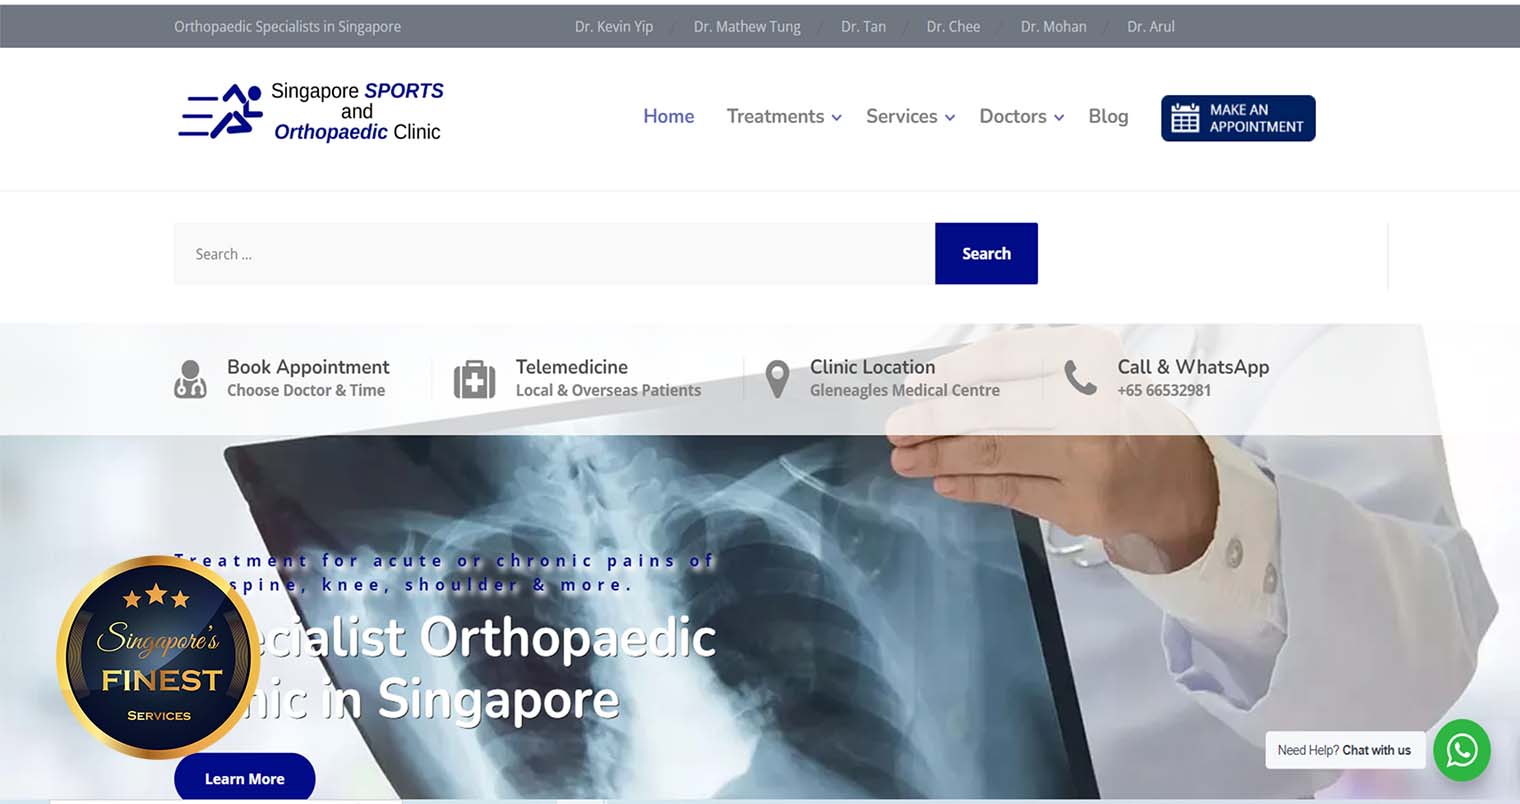 Singapore Sports and Orthopaedic Clinic - Orthopedic Centers in Singapore